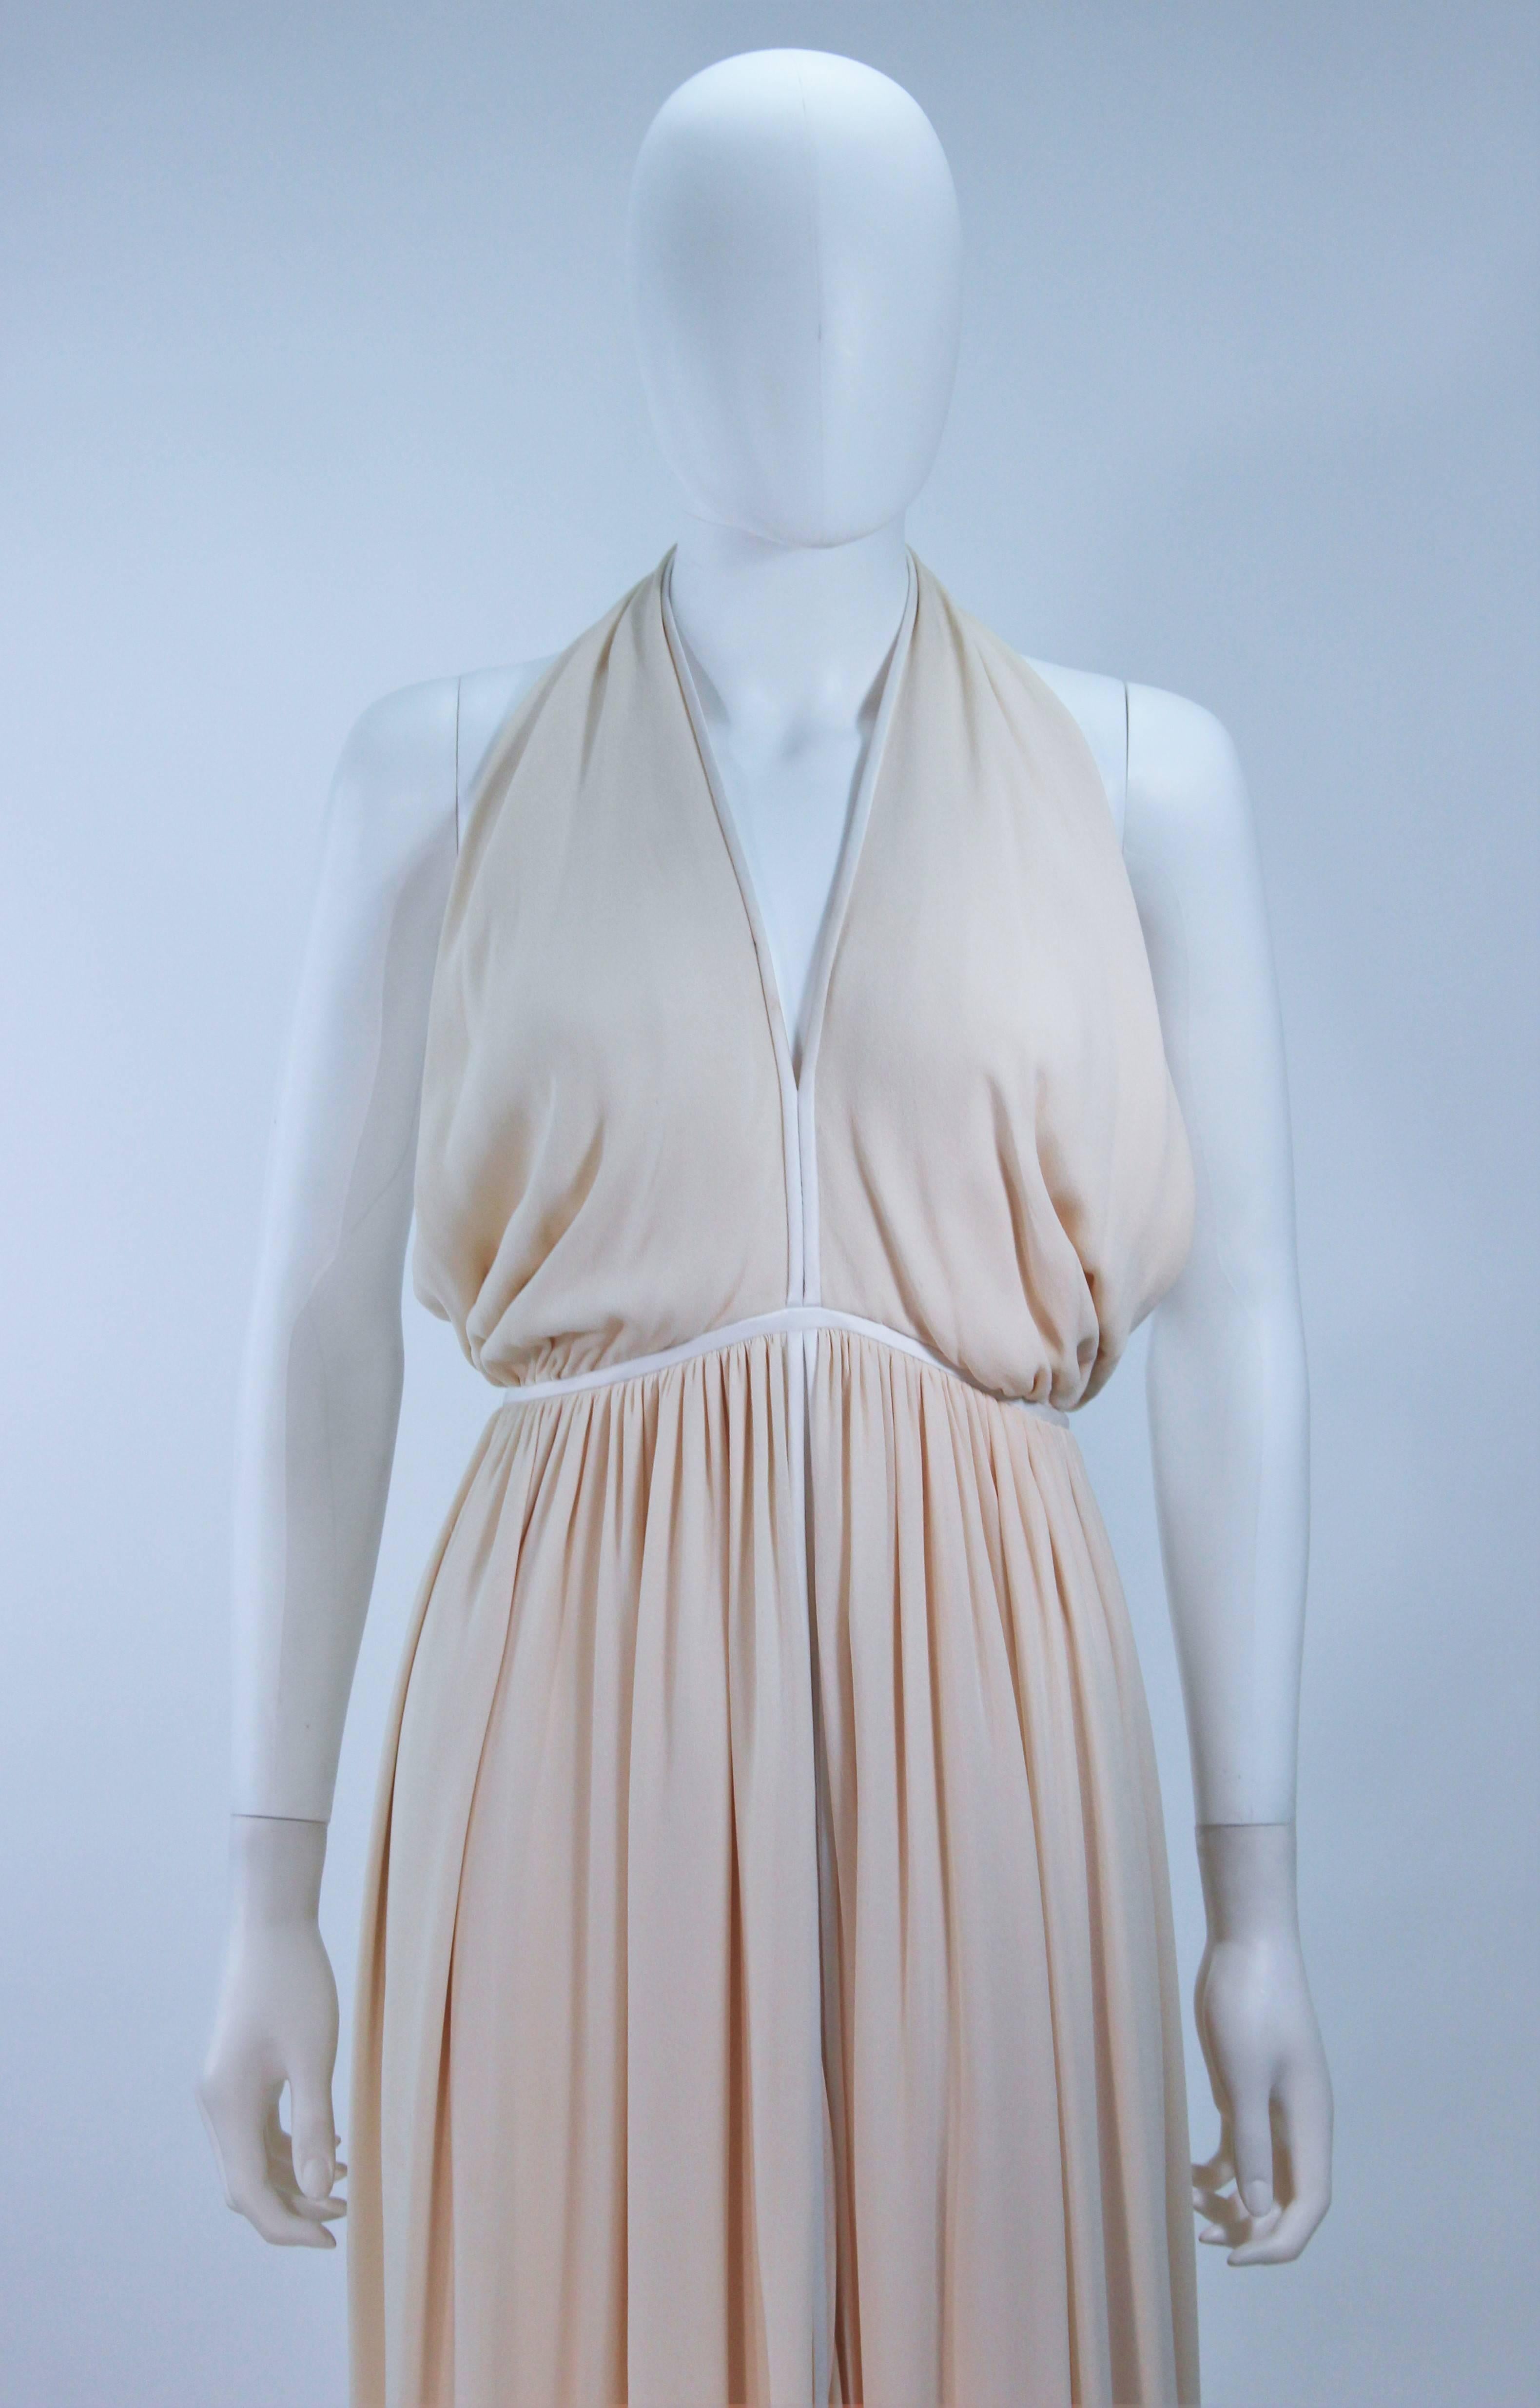 GALANOS Cream Silk Halter Gown with White Trim and Exposed Back Size 0 2 In Excellent Condition For Sale In Los Angeles, CA